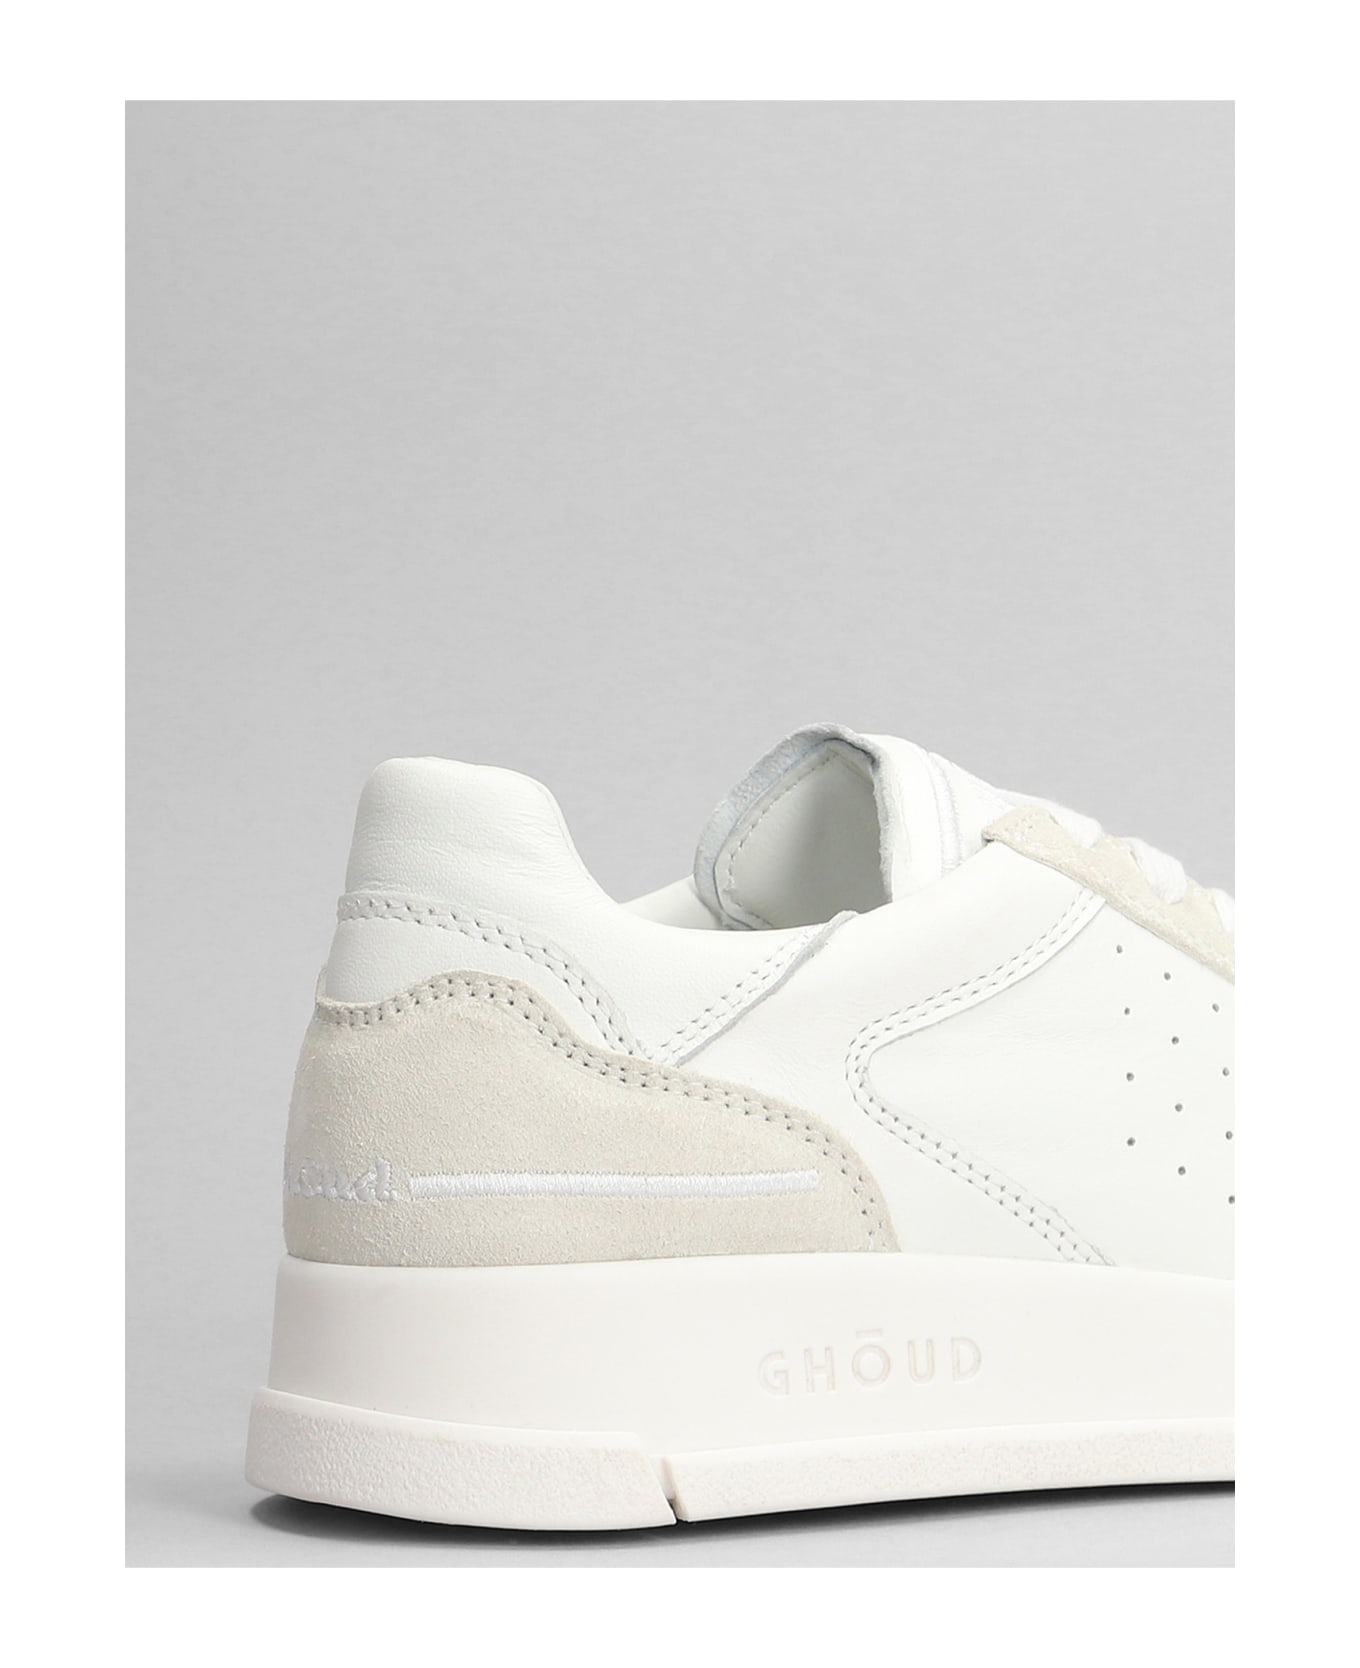 GHOUD Tweener Low Sneakers In White Suede And Leather - white